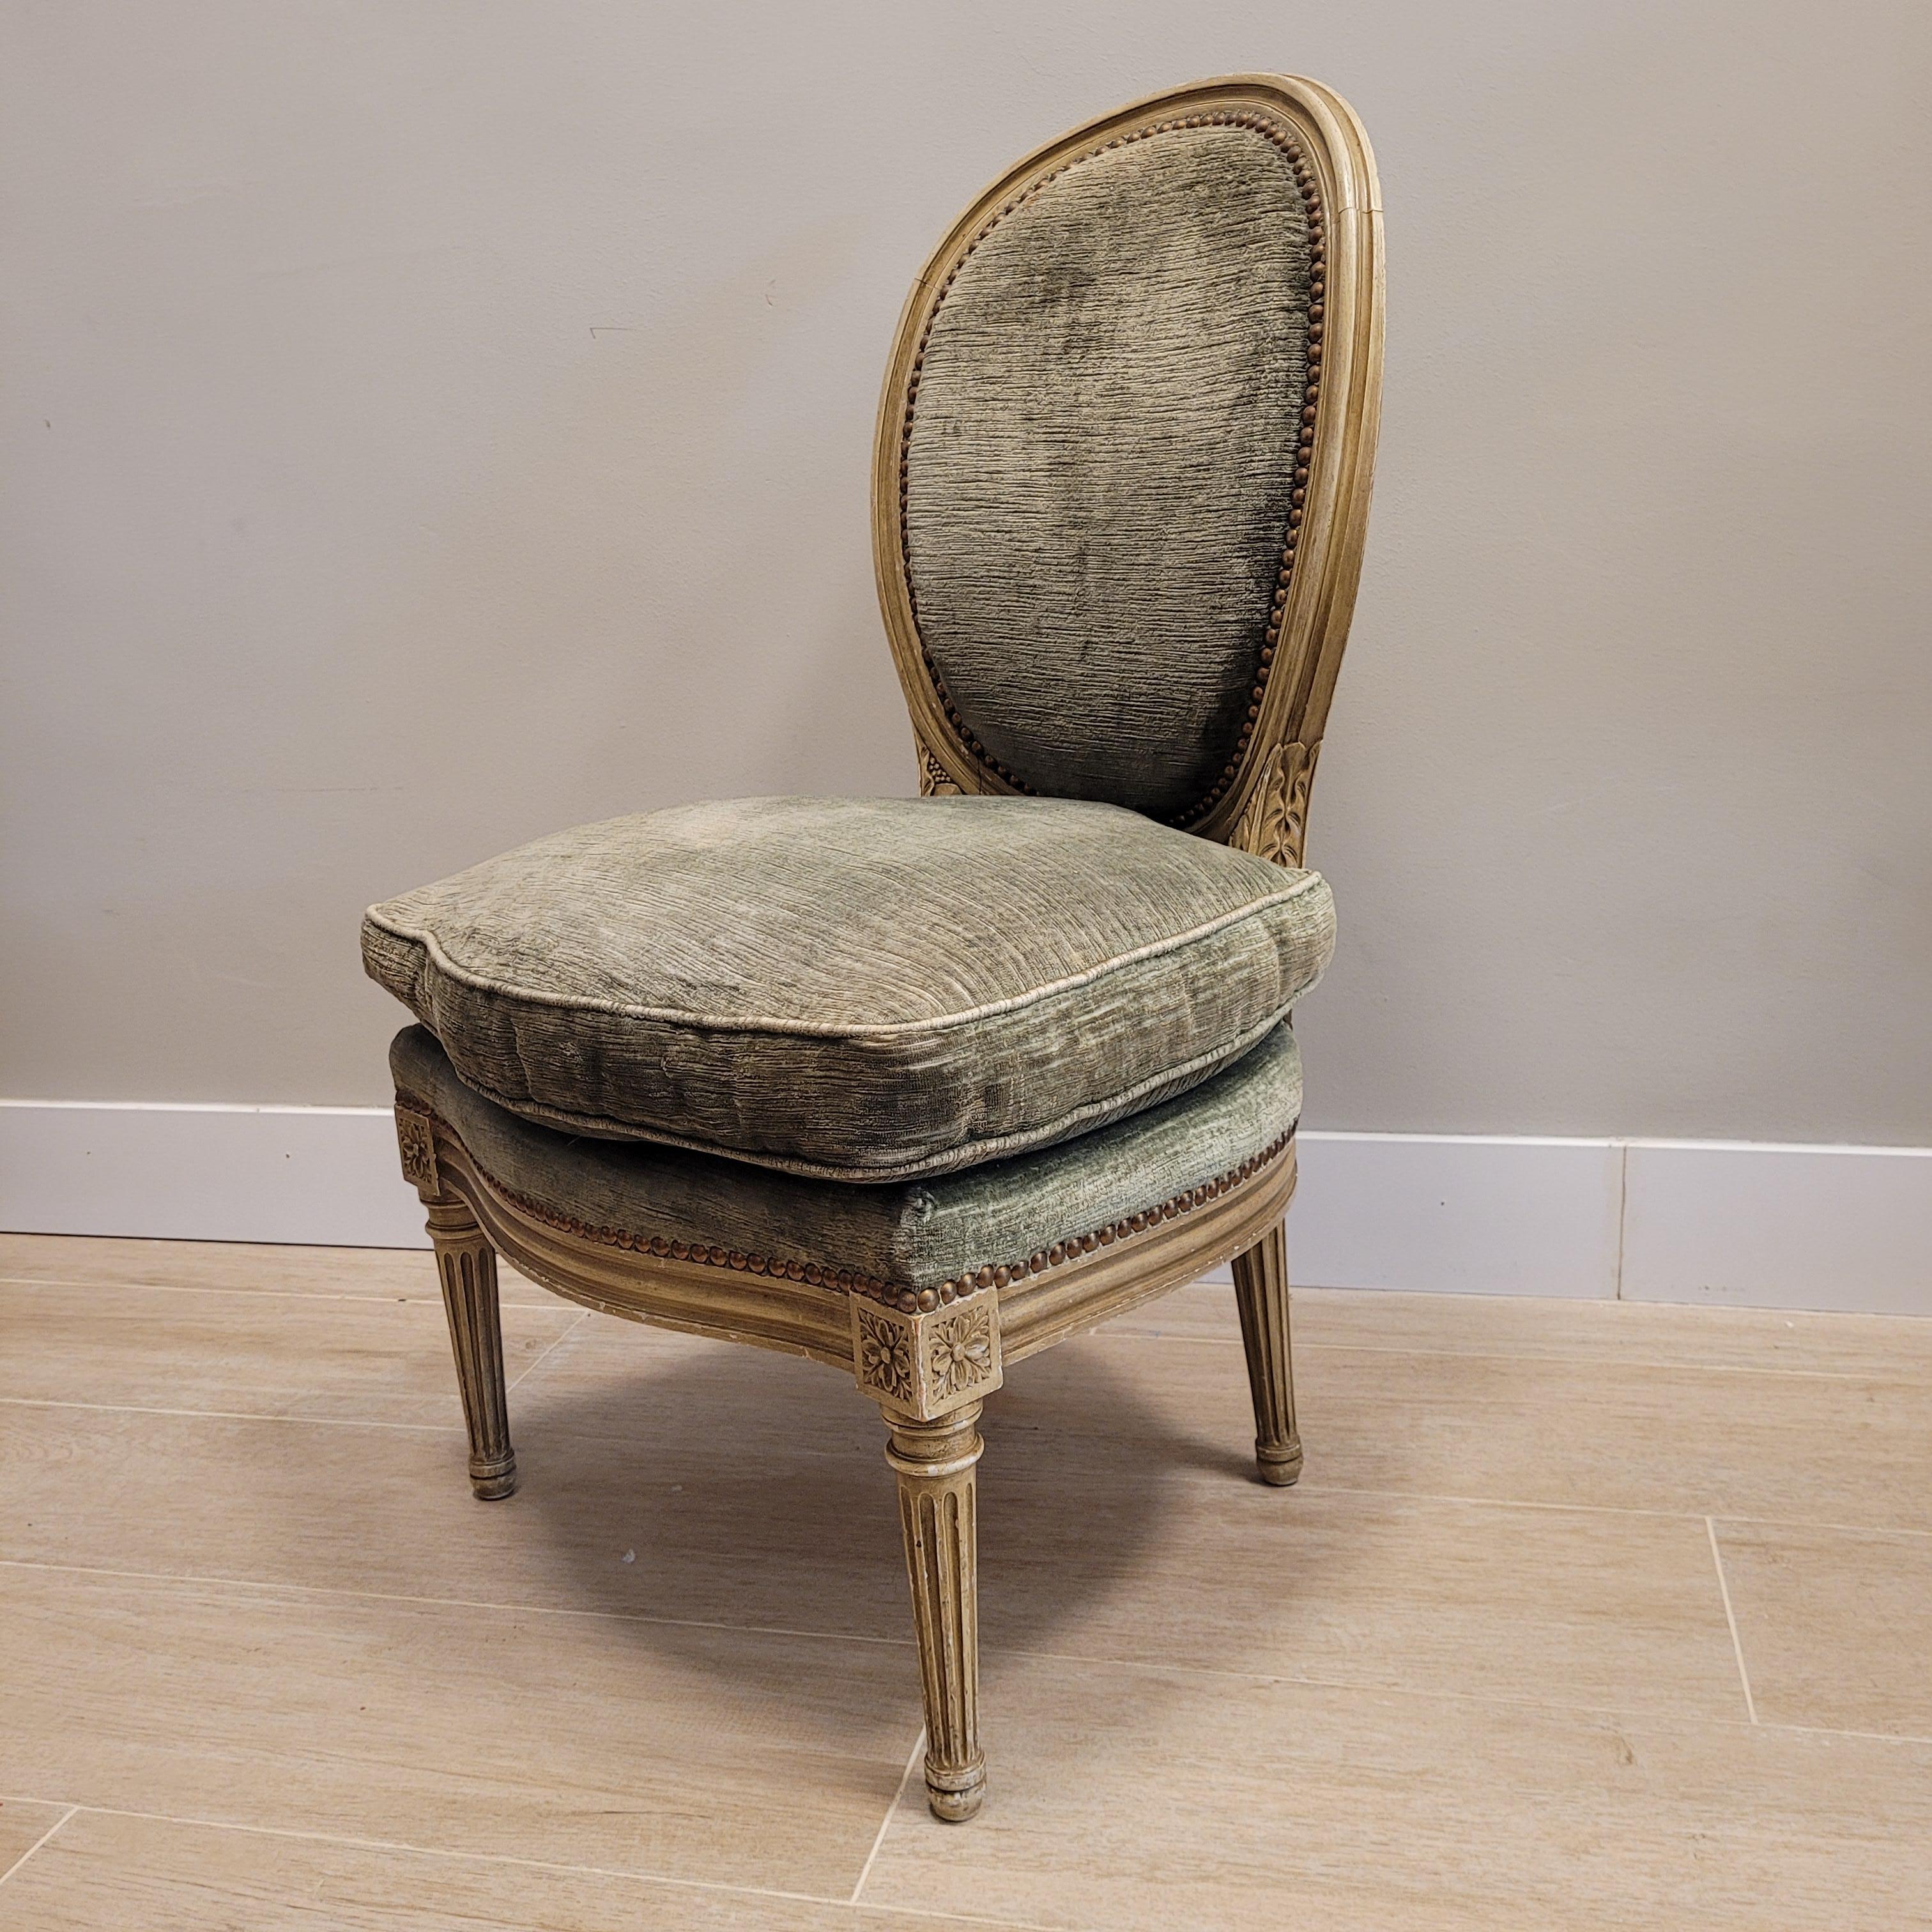 Beautiful set of French Napoleon III seats, Louis XVI style, with dry green upholstery.
The set is made up of an armchair, a charmeuse, which is lower in seat, it was used to sit near the fireplace and a stool or footrest, all upholstered in dry